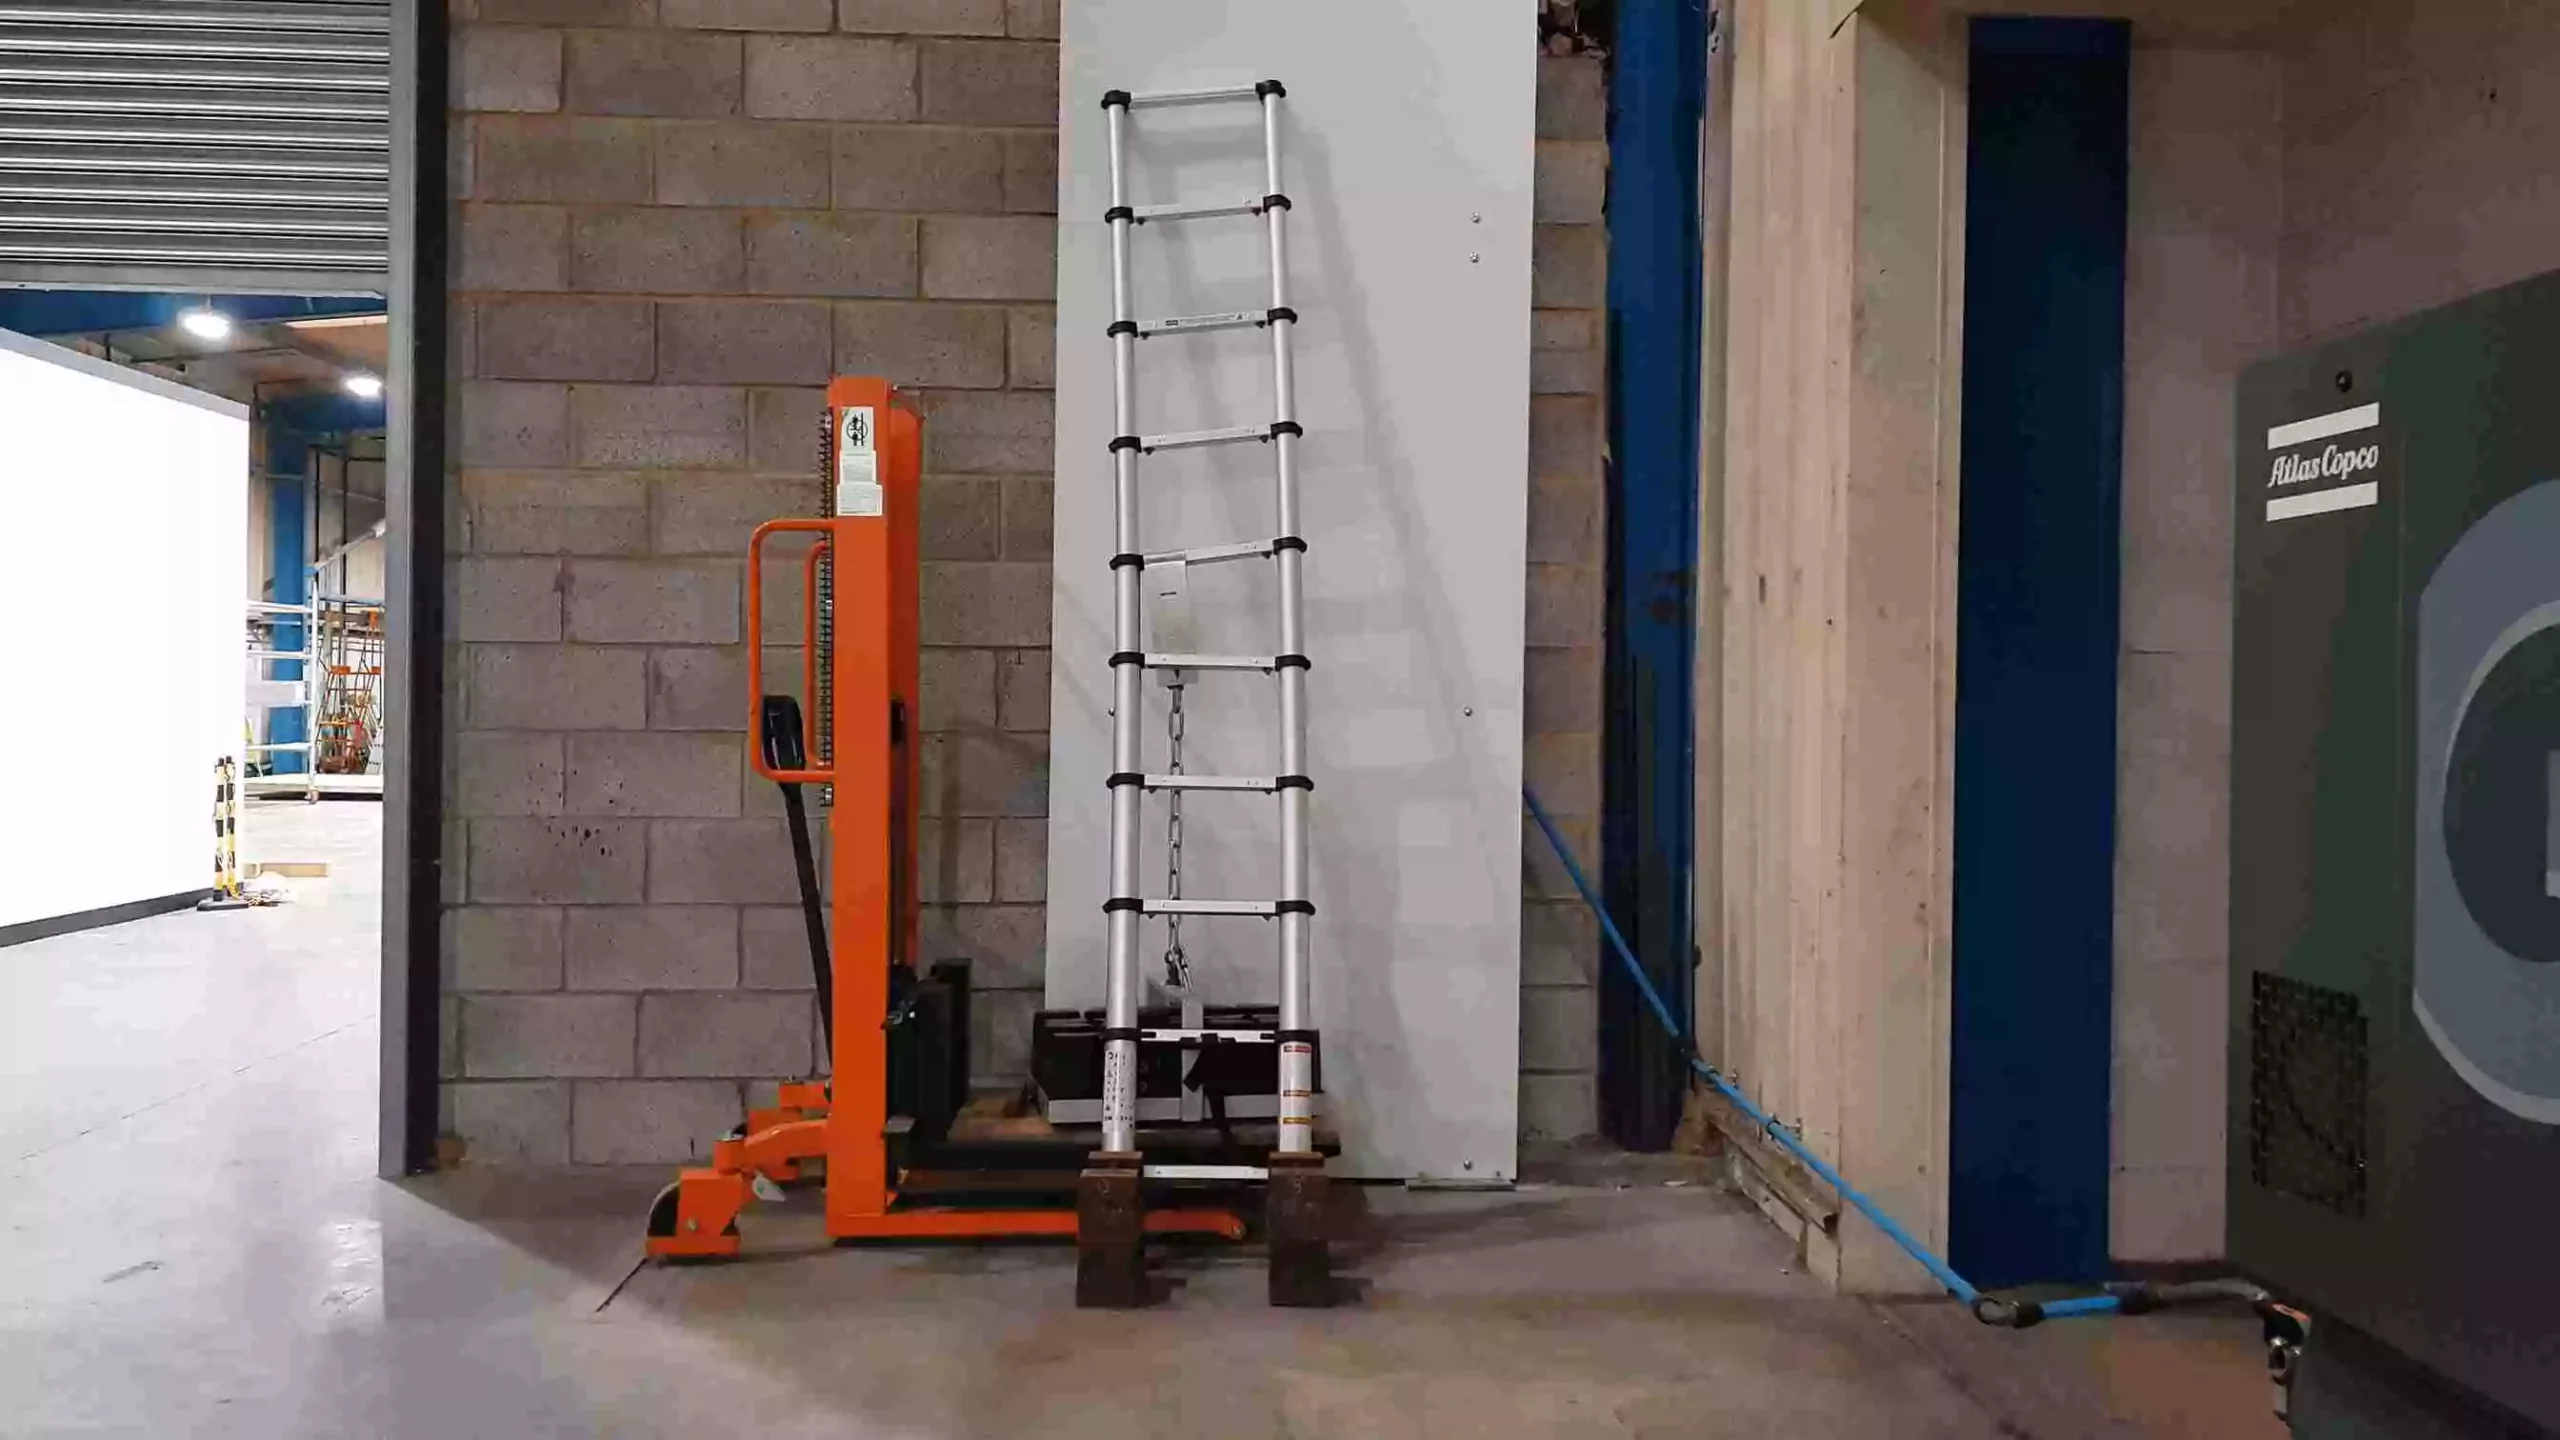 Are Telescoping ladders OSHA approved